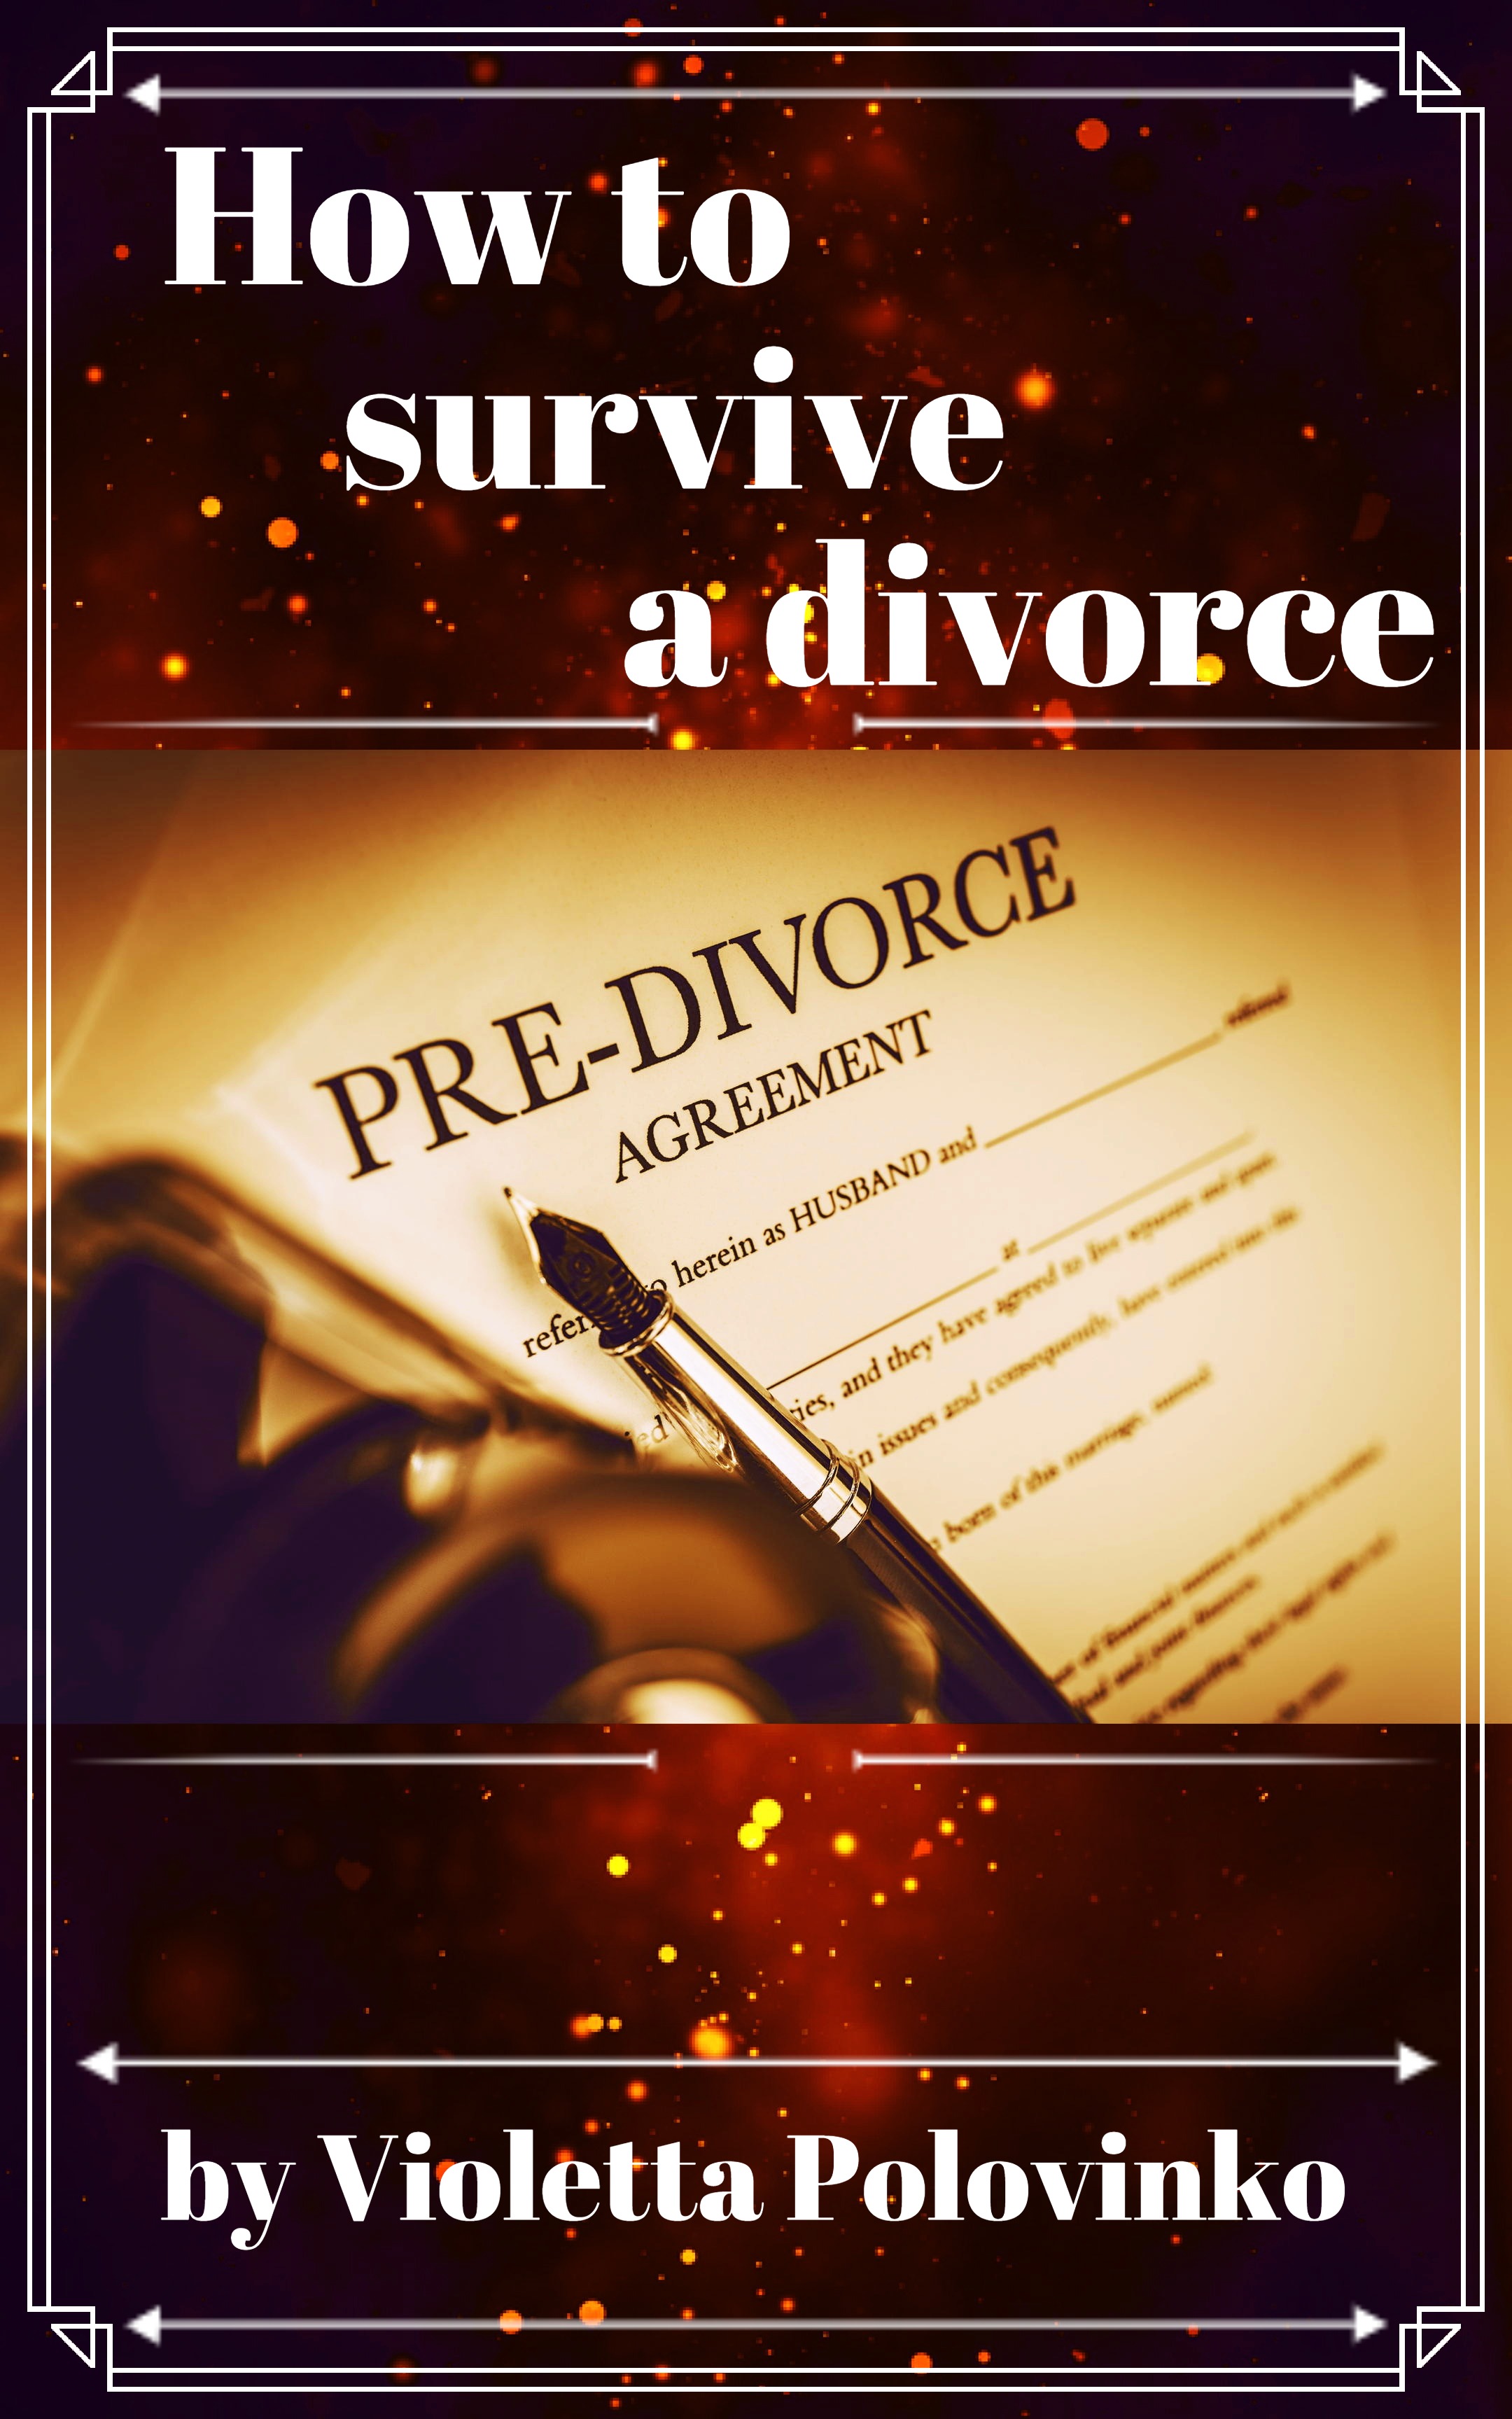 FREE: How to survive a divorce:a practical guide to survival by Violetta Polovinko